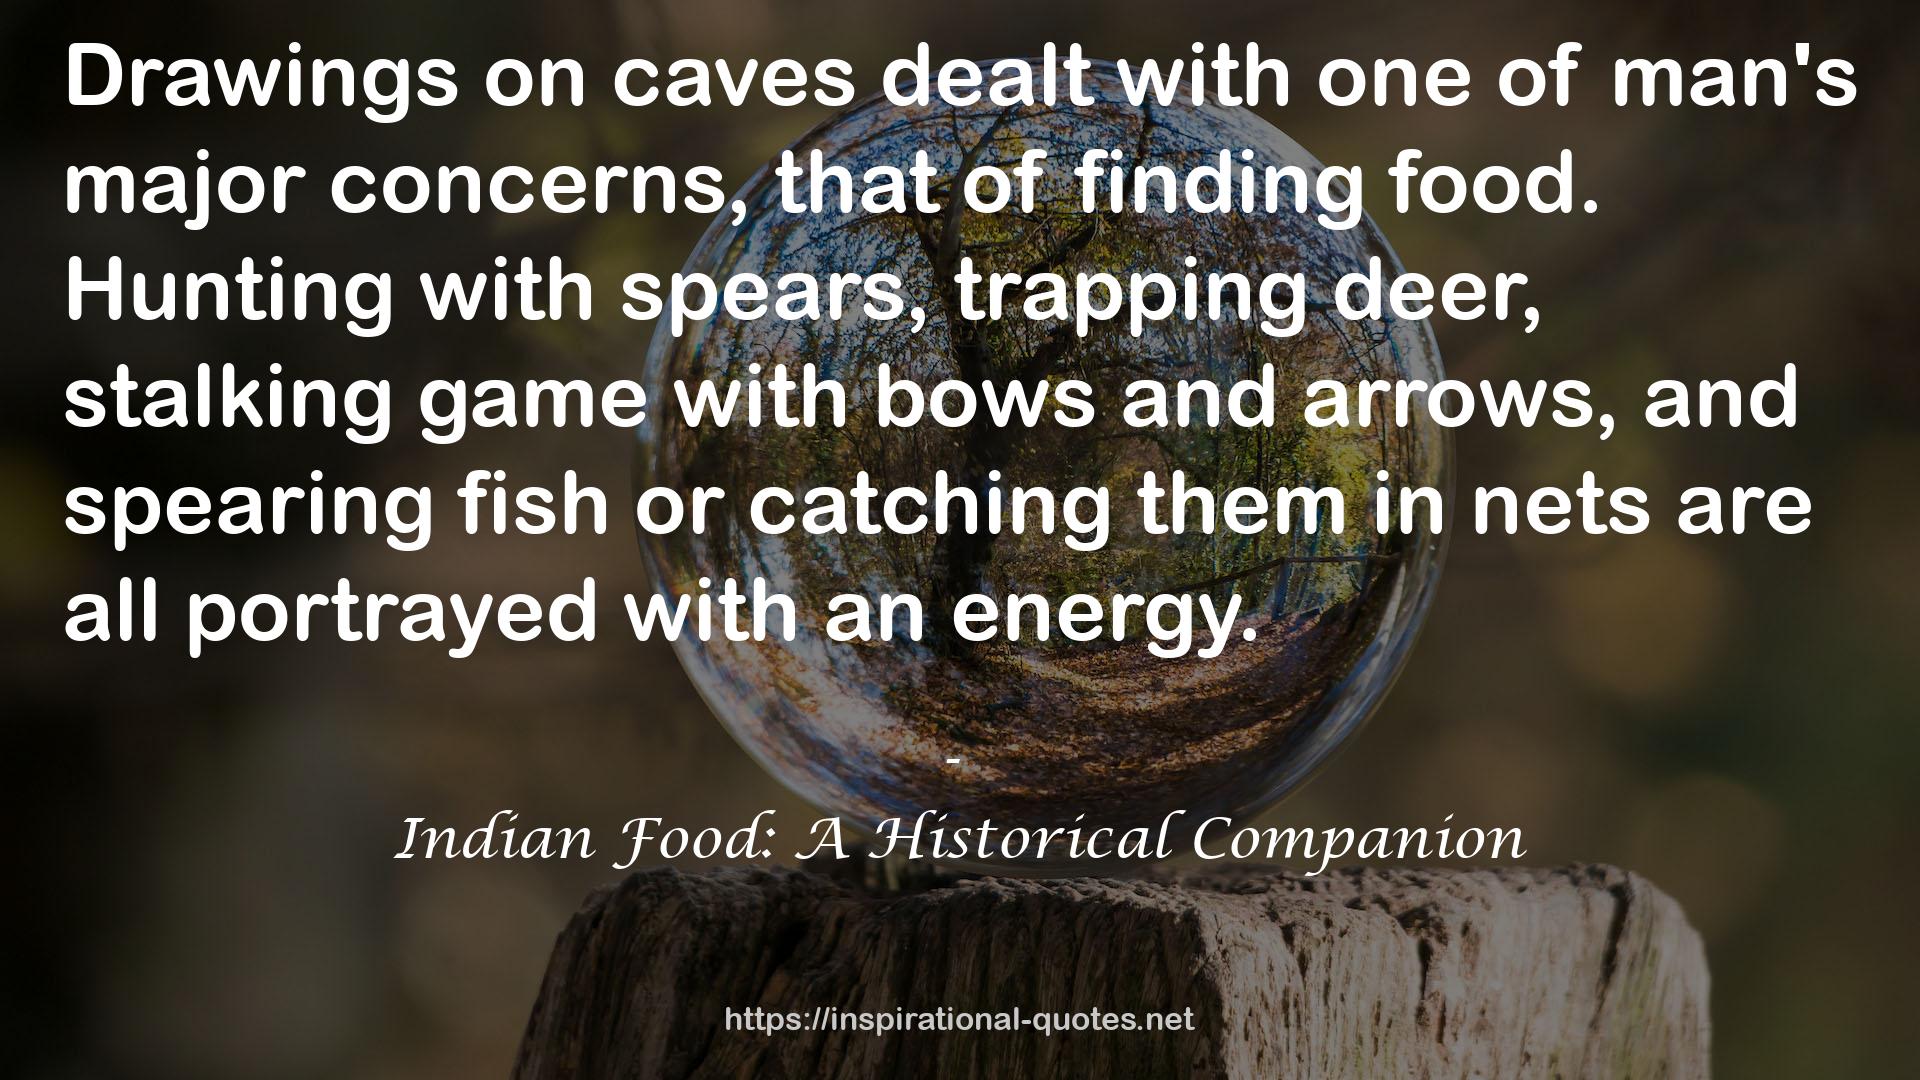 Indian Food: A Historical Companion QUOTES